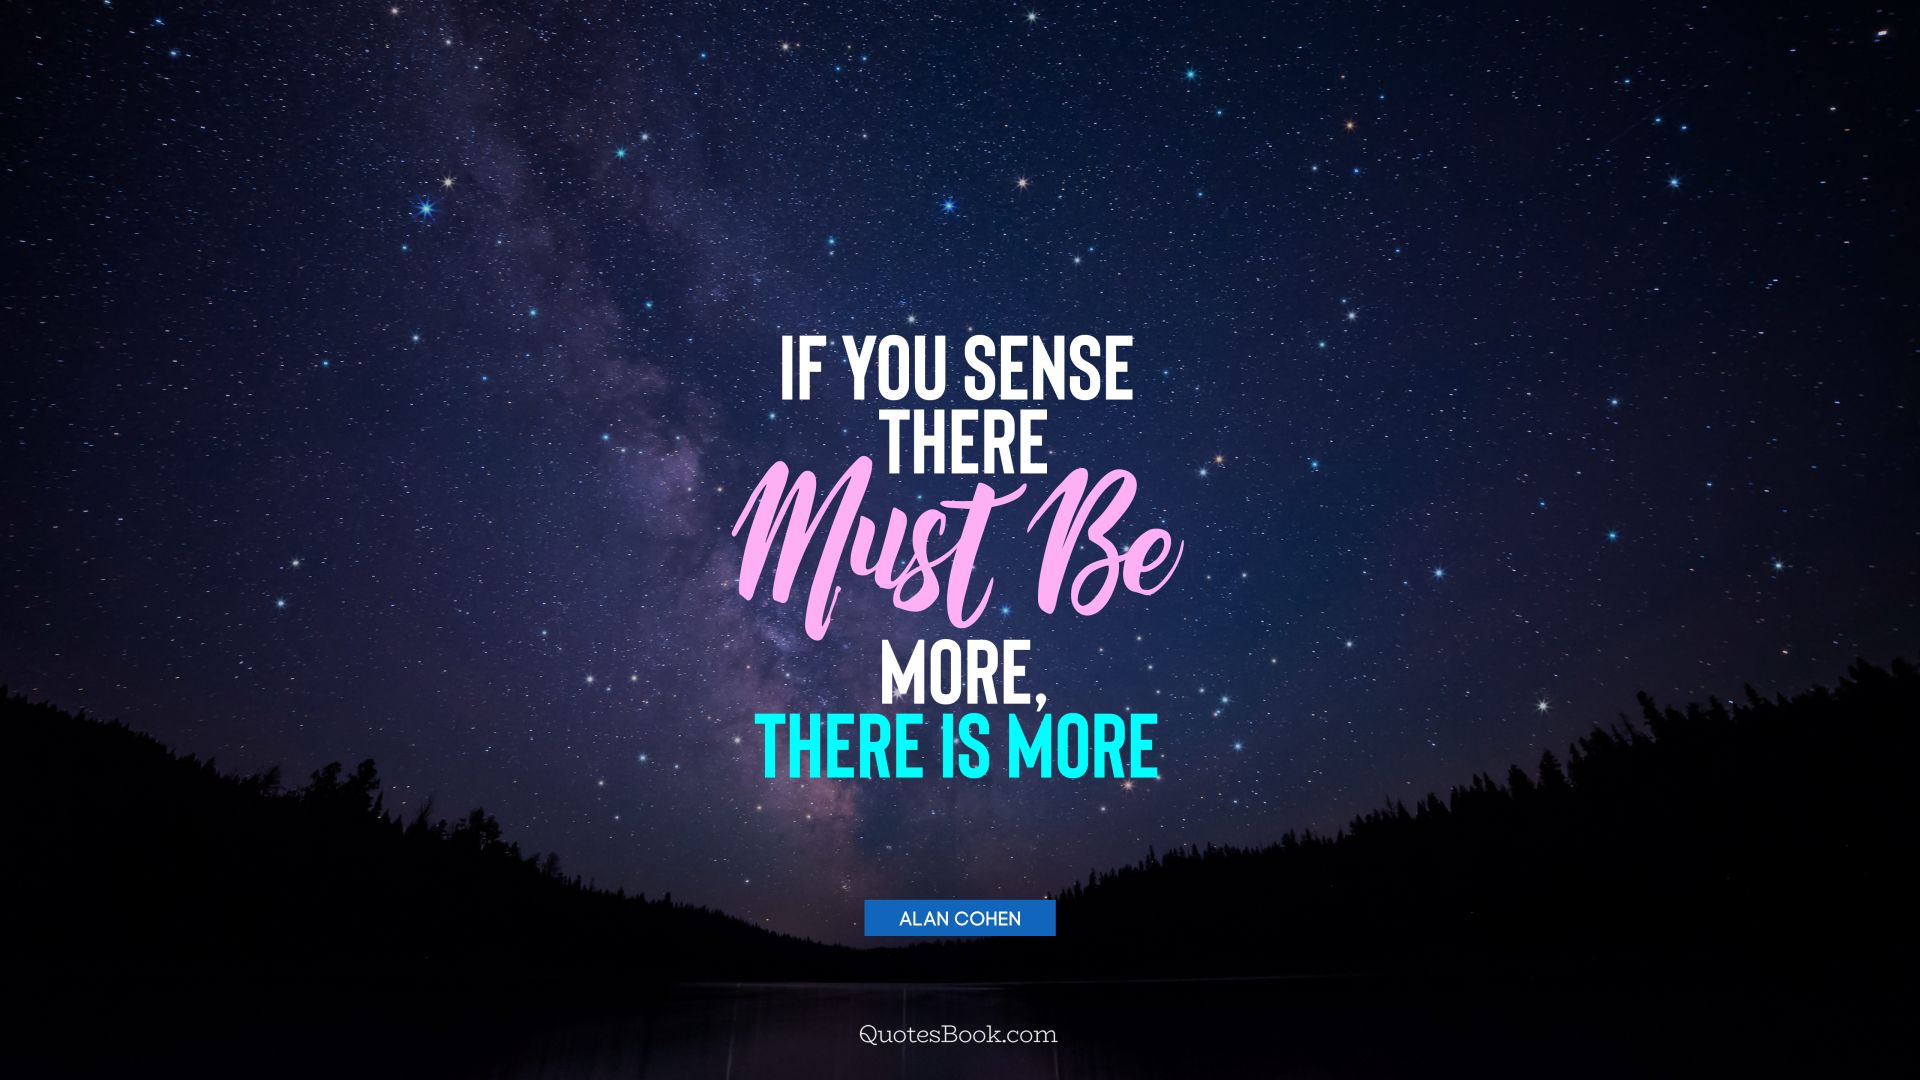 If you sense there must be more, there is more. - Quote by Alan Cohen